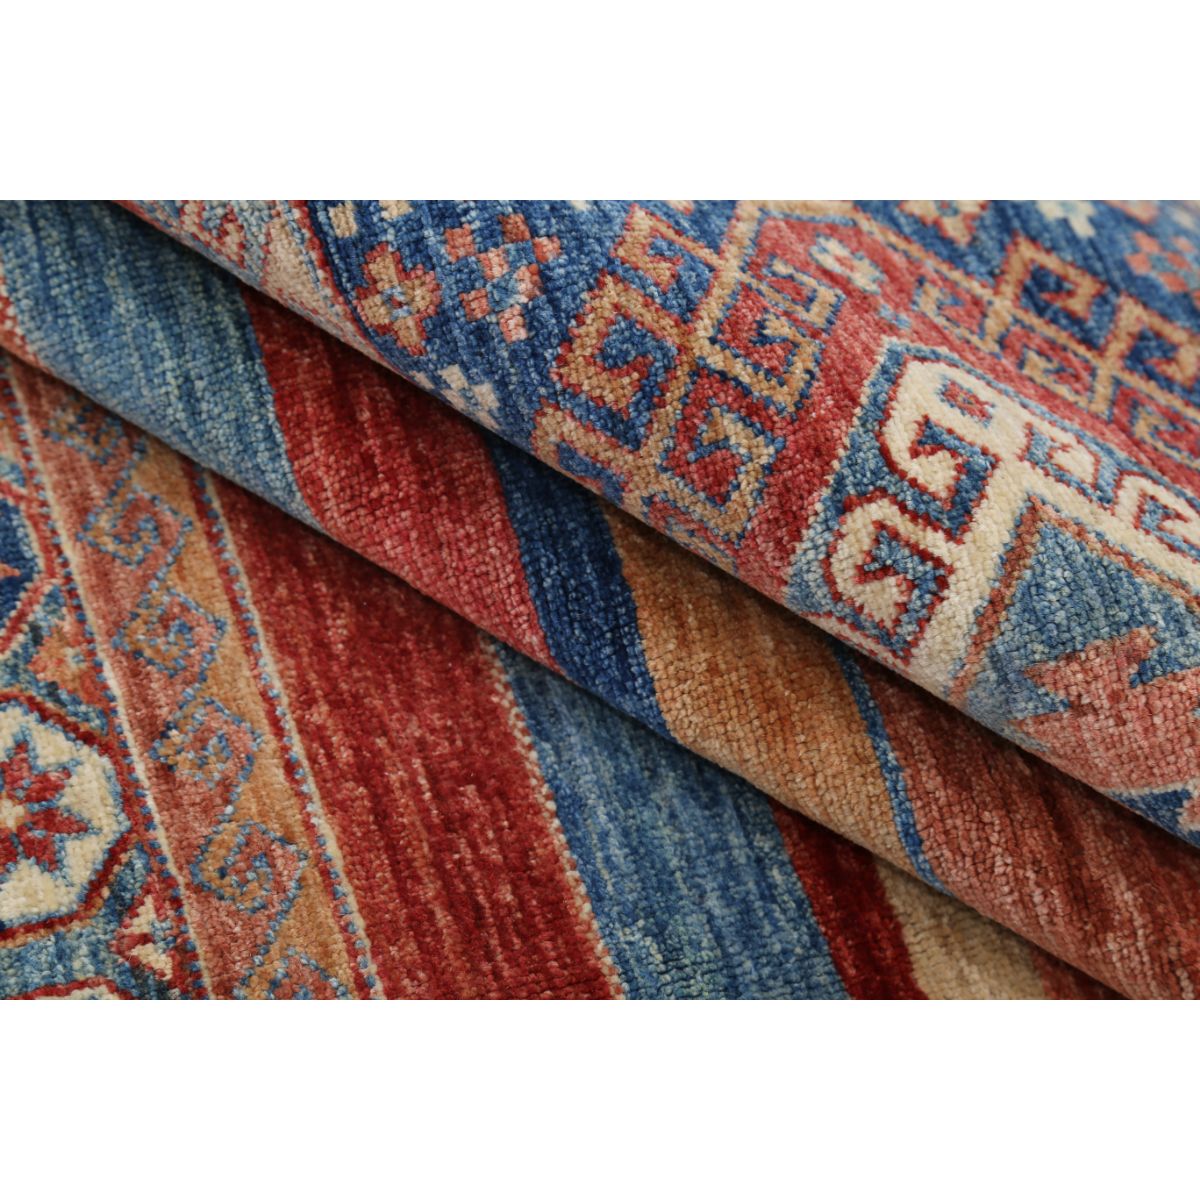 Khurjeen 6'8" X 10'0" Wool Hand-Knotted Rug